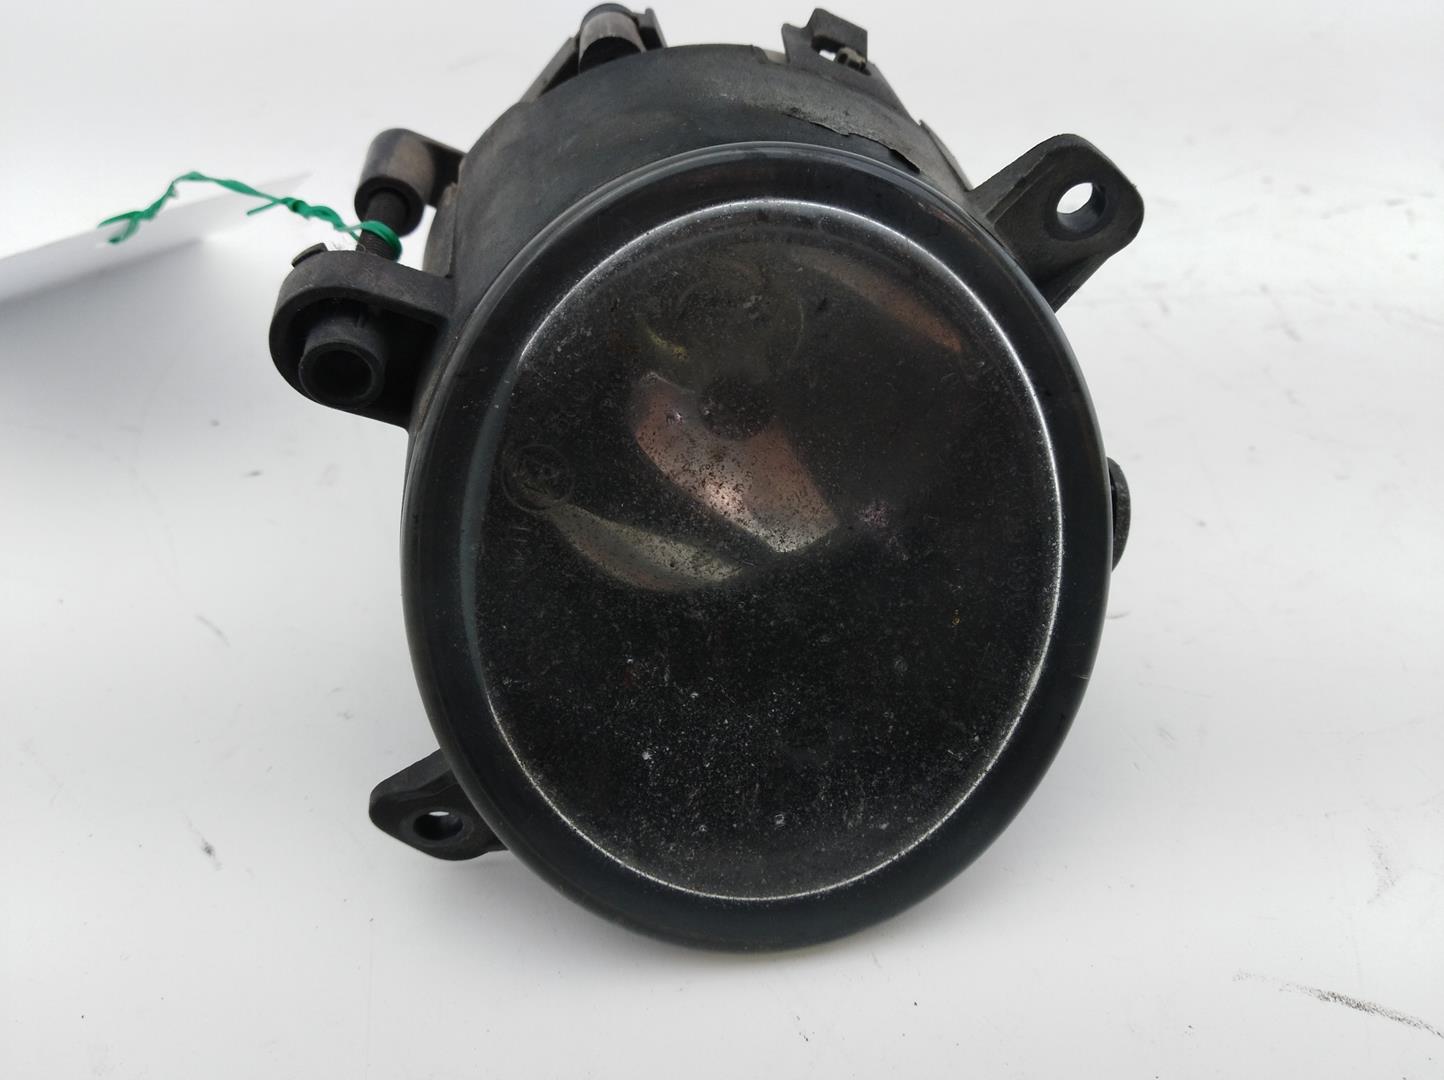 FORD Mondeo 3 generation (2000-2007) Front Right Fog Light 1S7115K201AC, 1S7115K201AC, 1S7115K201AC 24666117